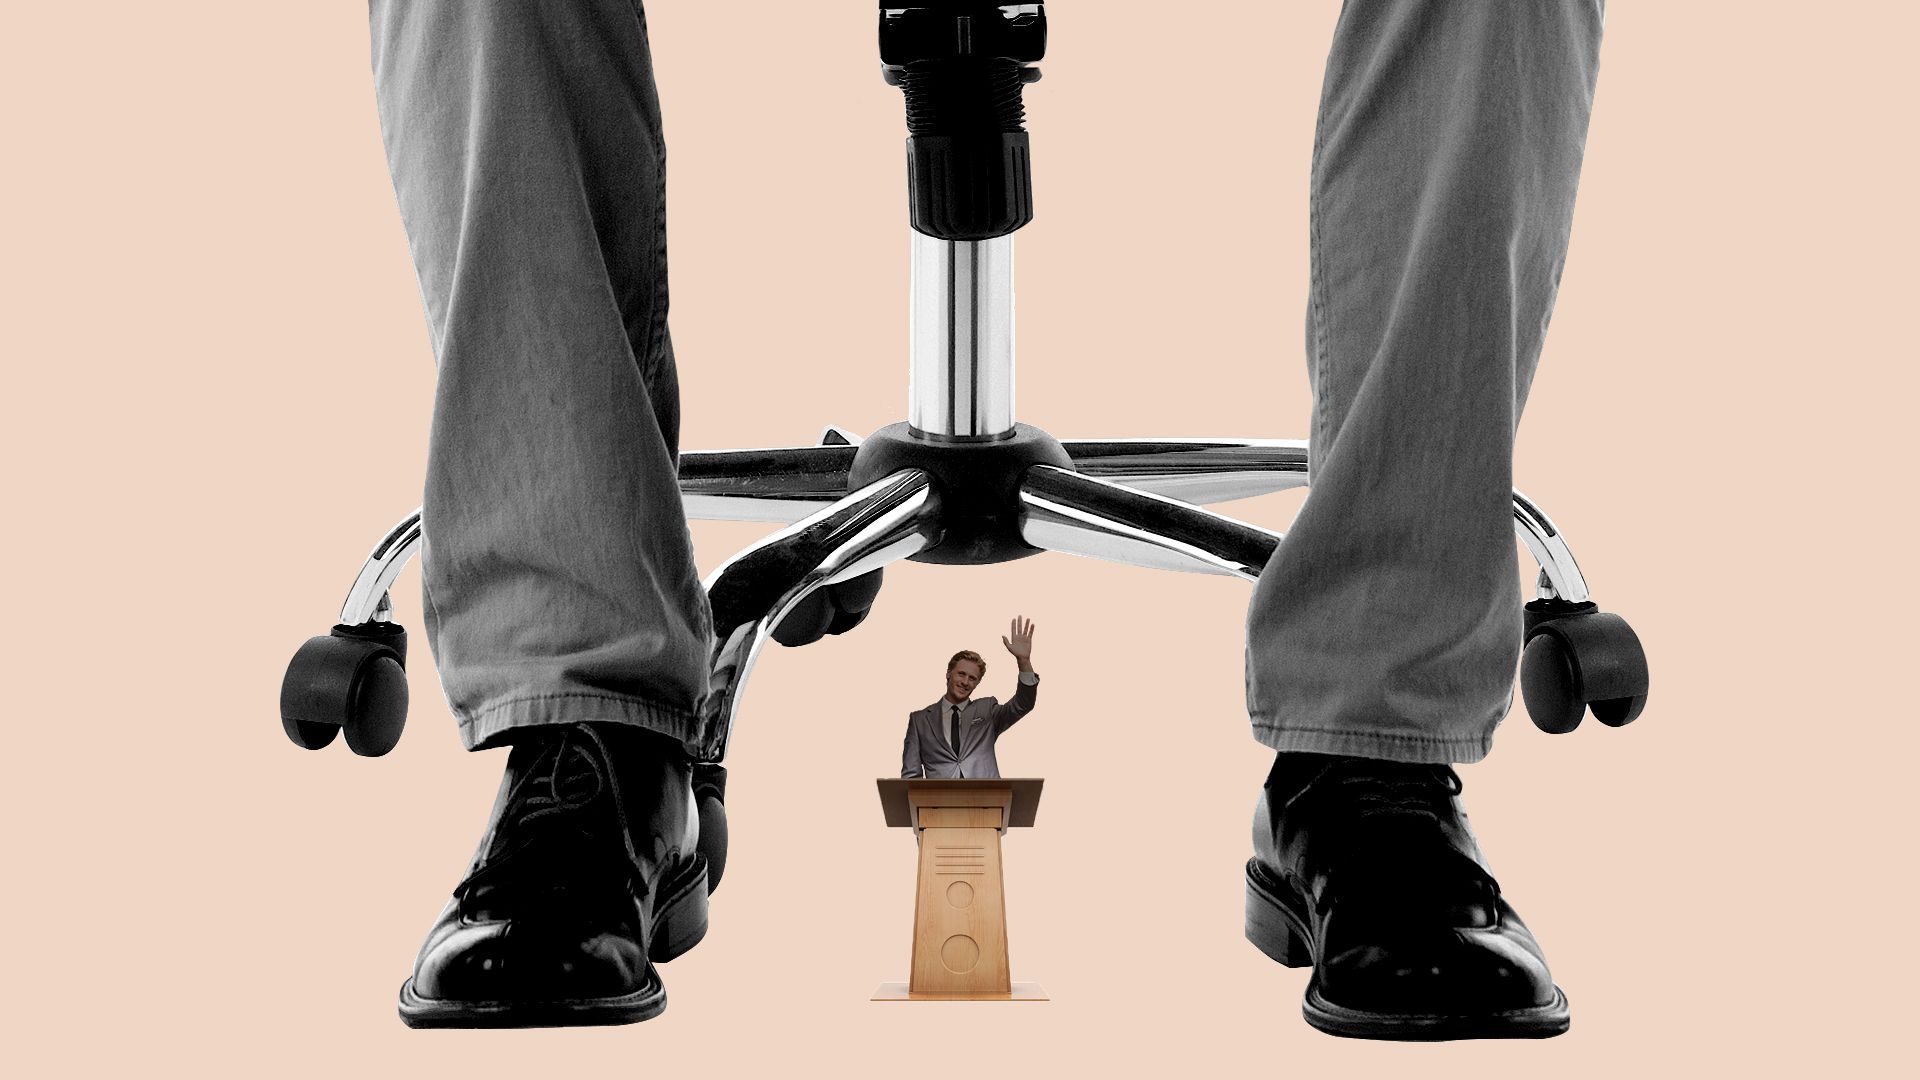 Illustration of politician under a chair